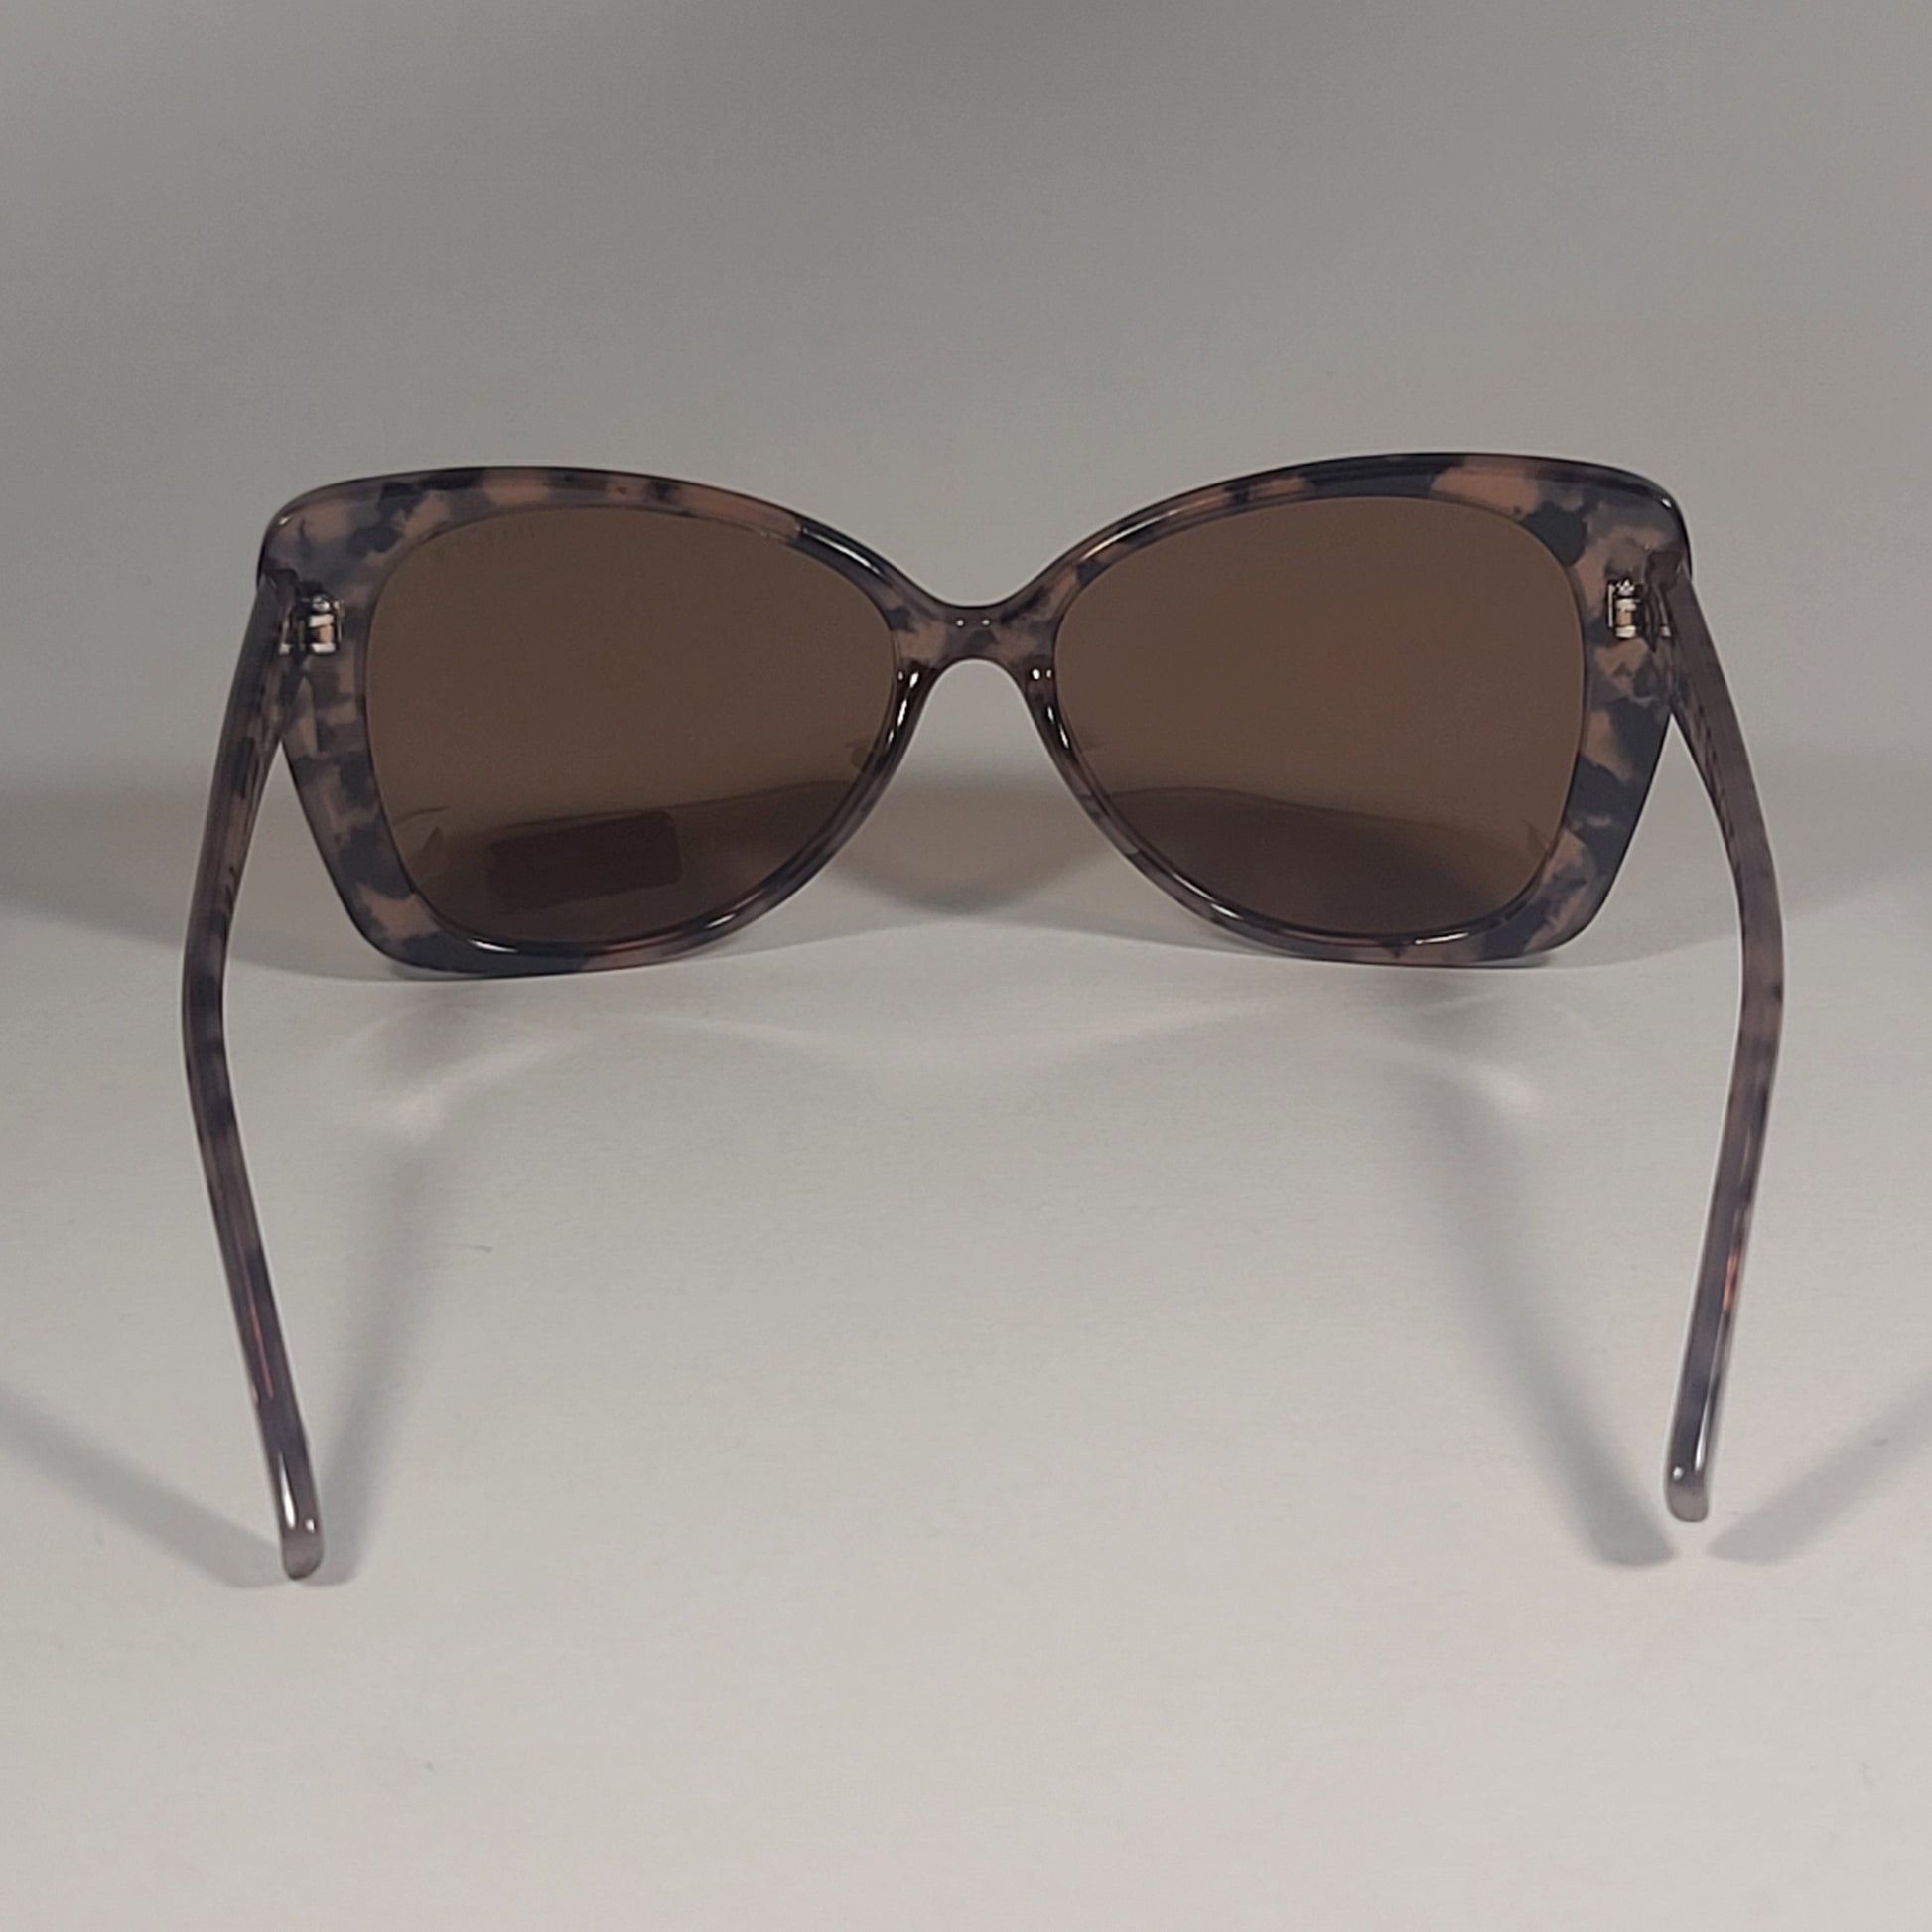 Tommy Hilfiger WP OL609P Polarized Butterfly Sunglasses Tortoise Brown Lens 56mm - Sunglasses